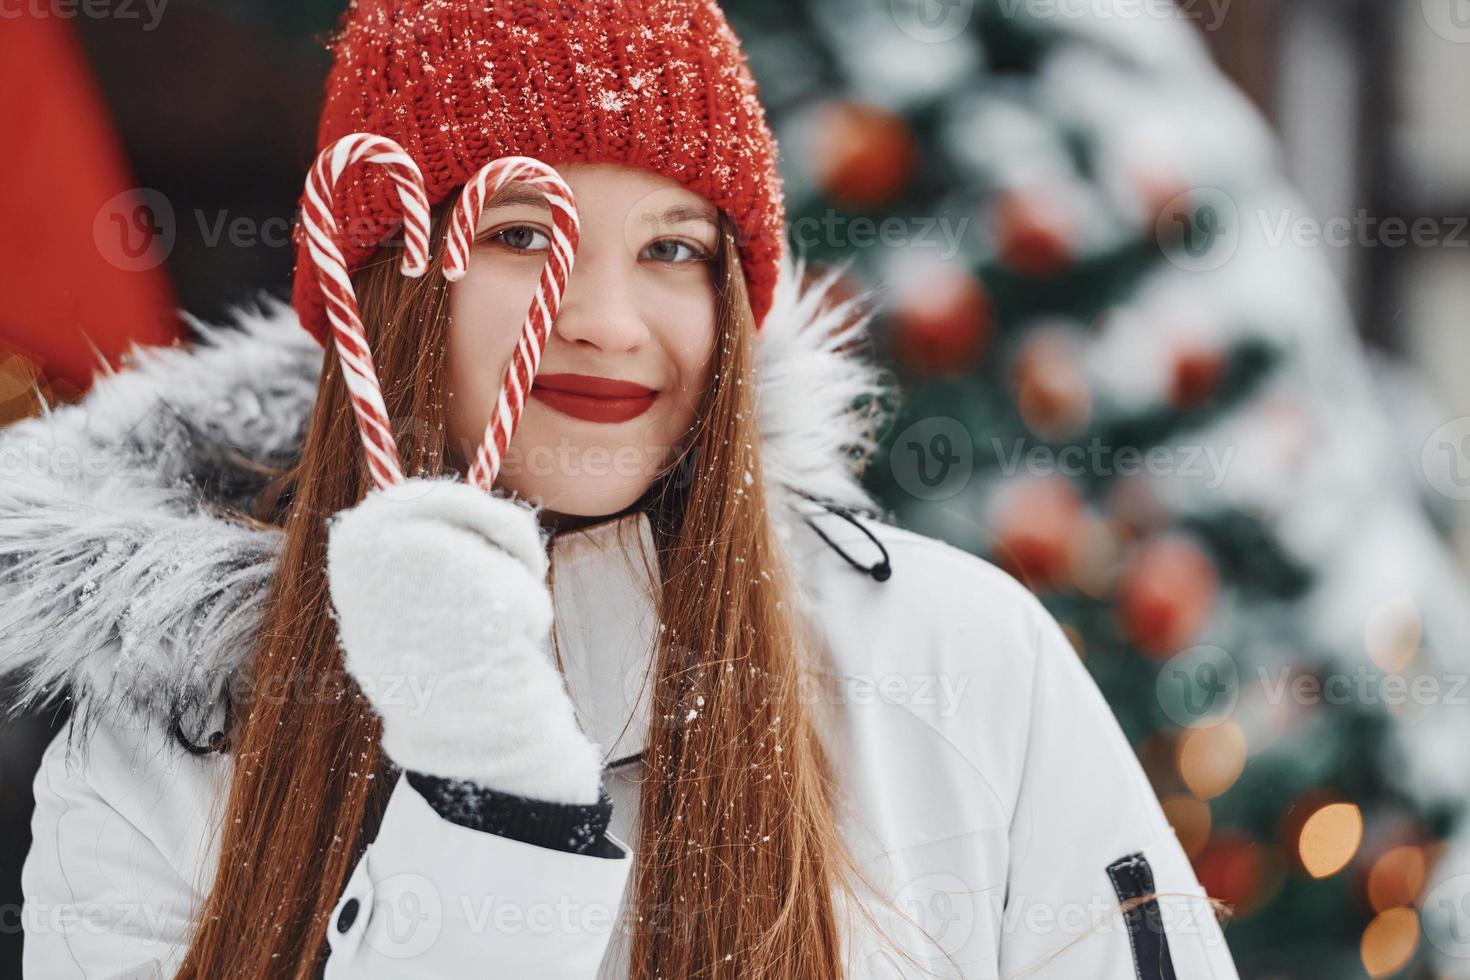 Holding sweets. Happy young woman standing outdoors and celebrating christmas holidays photo